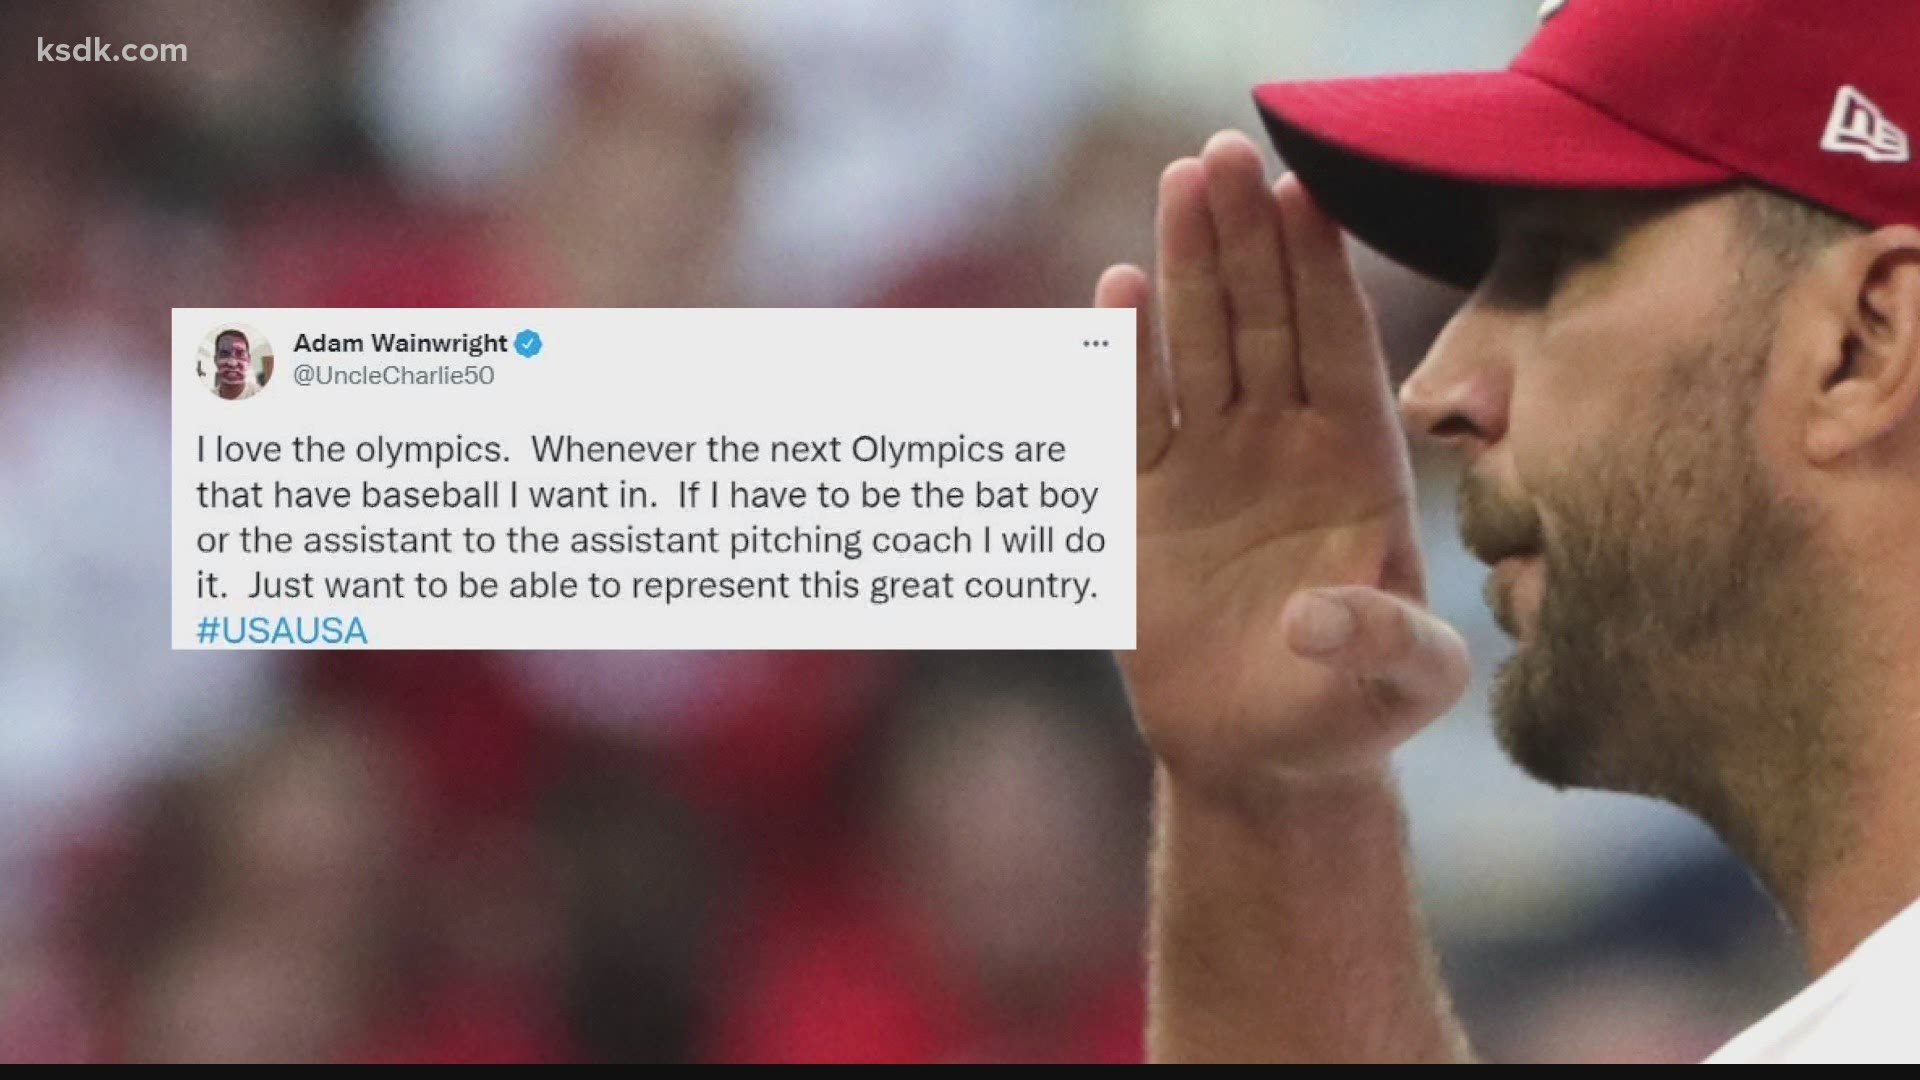 "If I have to be the bat boy or the assistant to the assistant pitching coach I will do it. Just want to be able to represent this great country," Wainwright tweeted